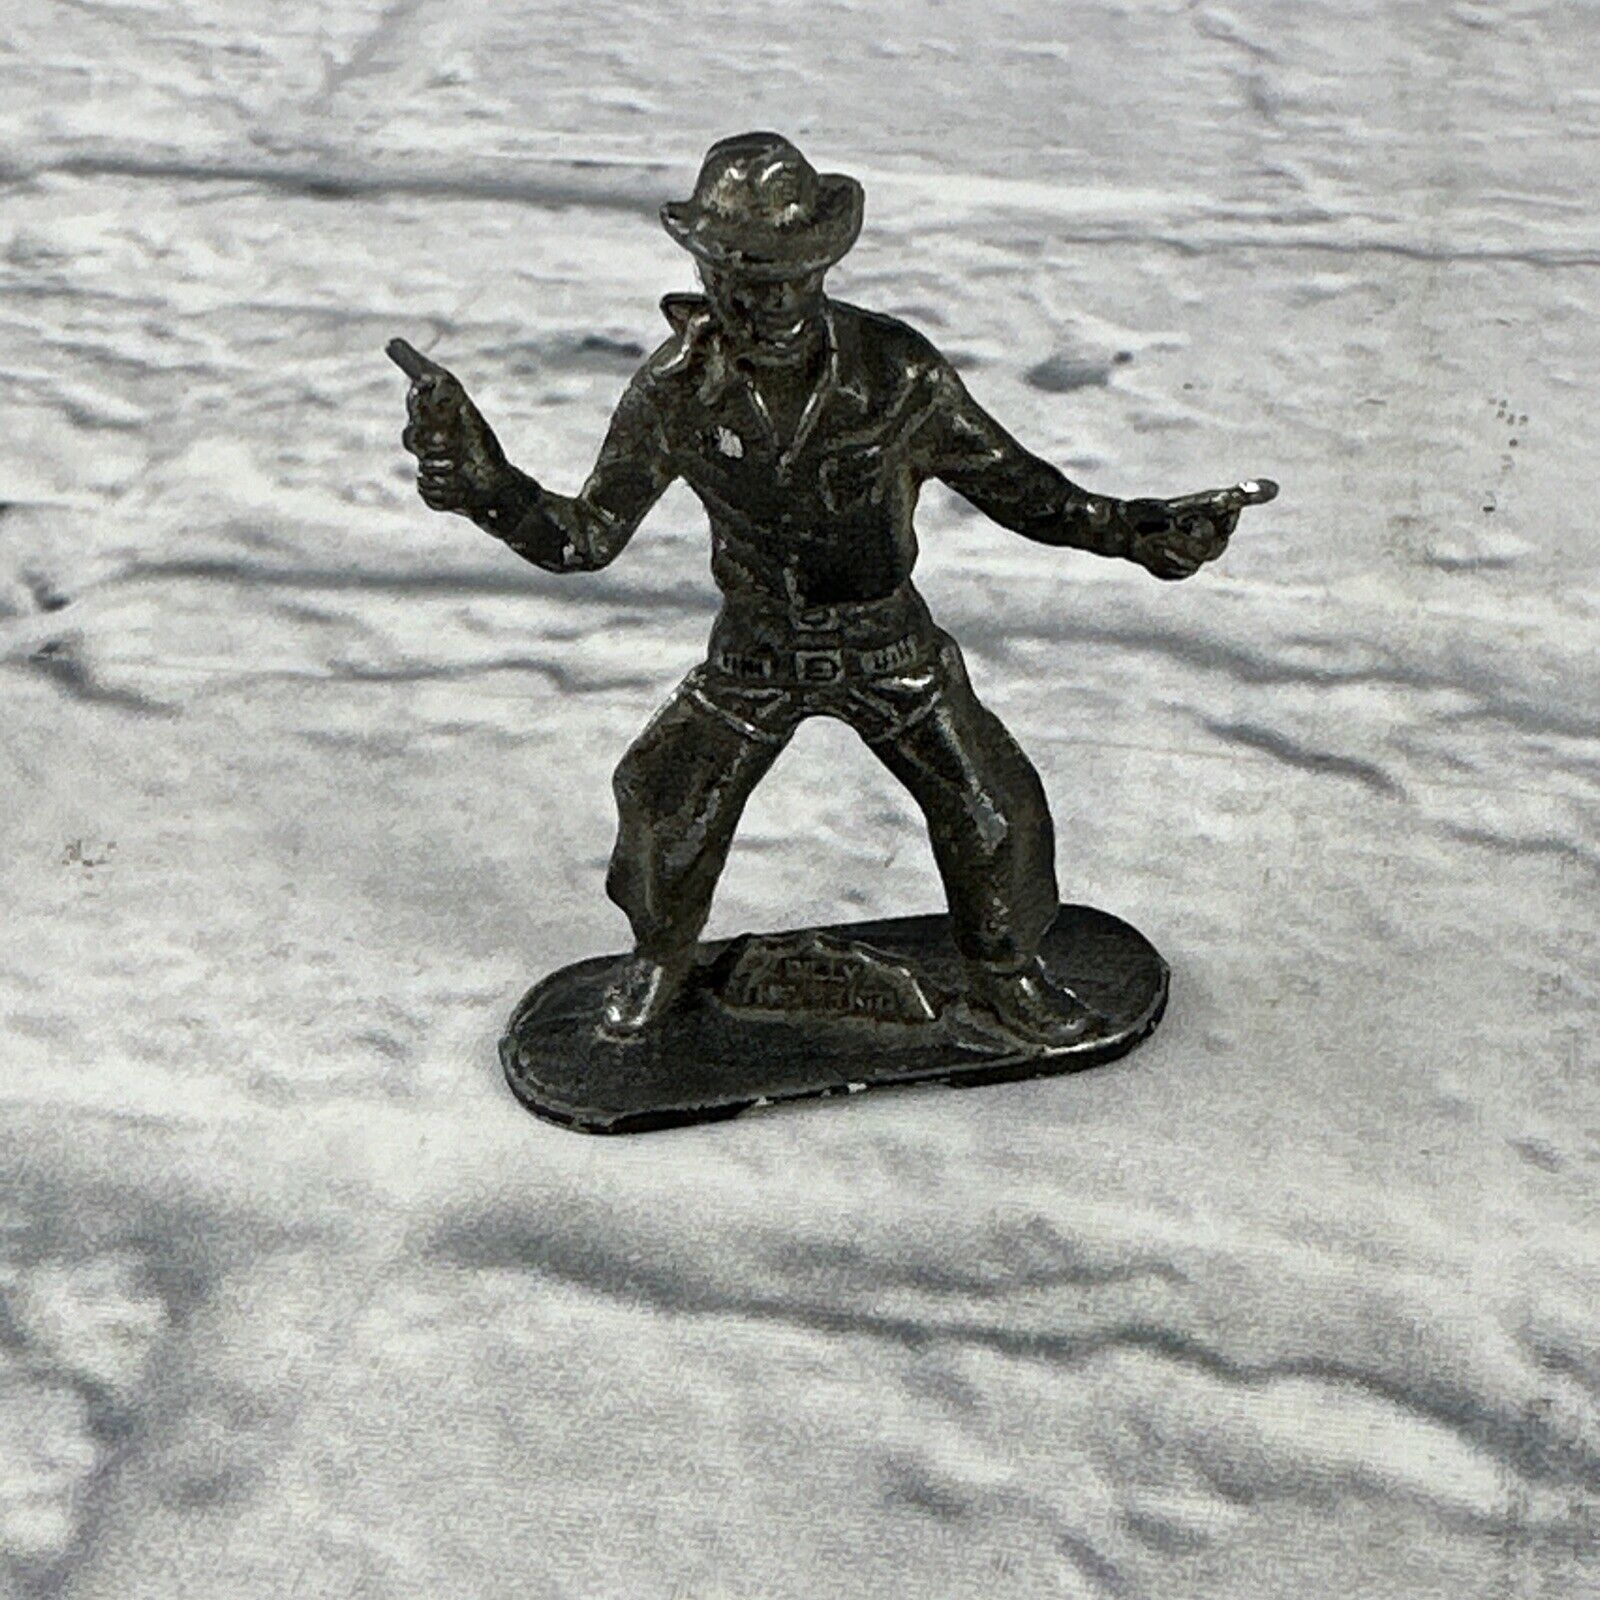 Vintage Billy The Kid Silver Tone Pewter Figurine 2.5””